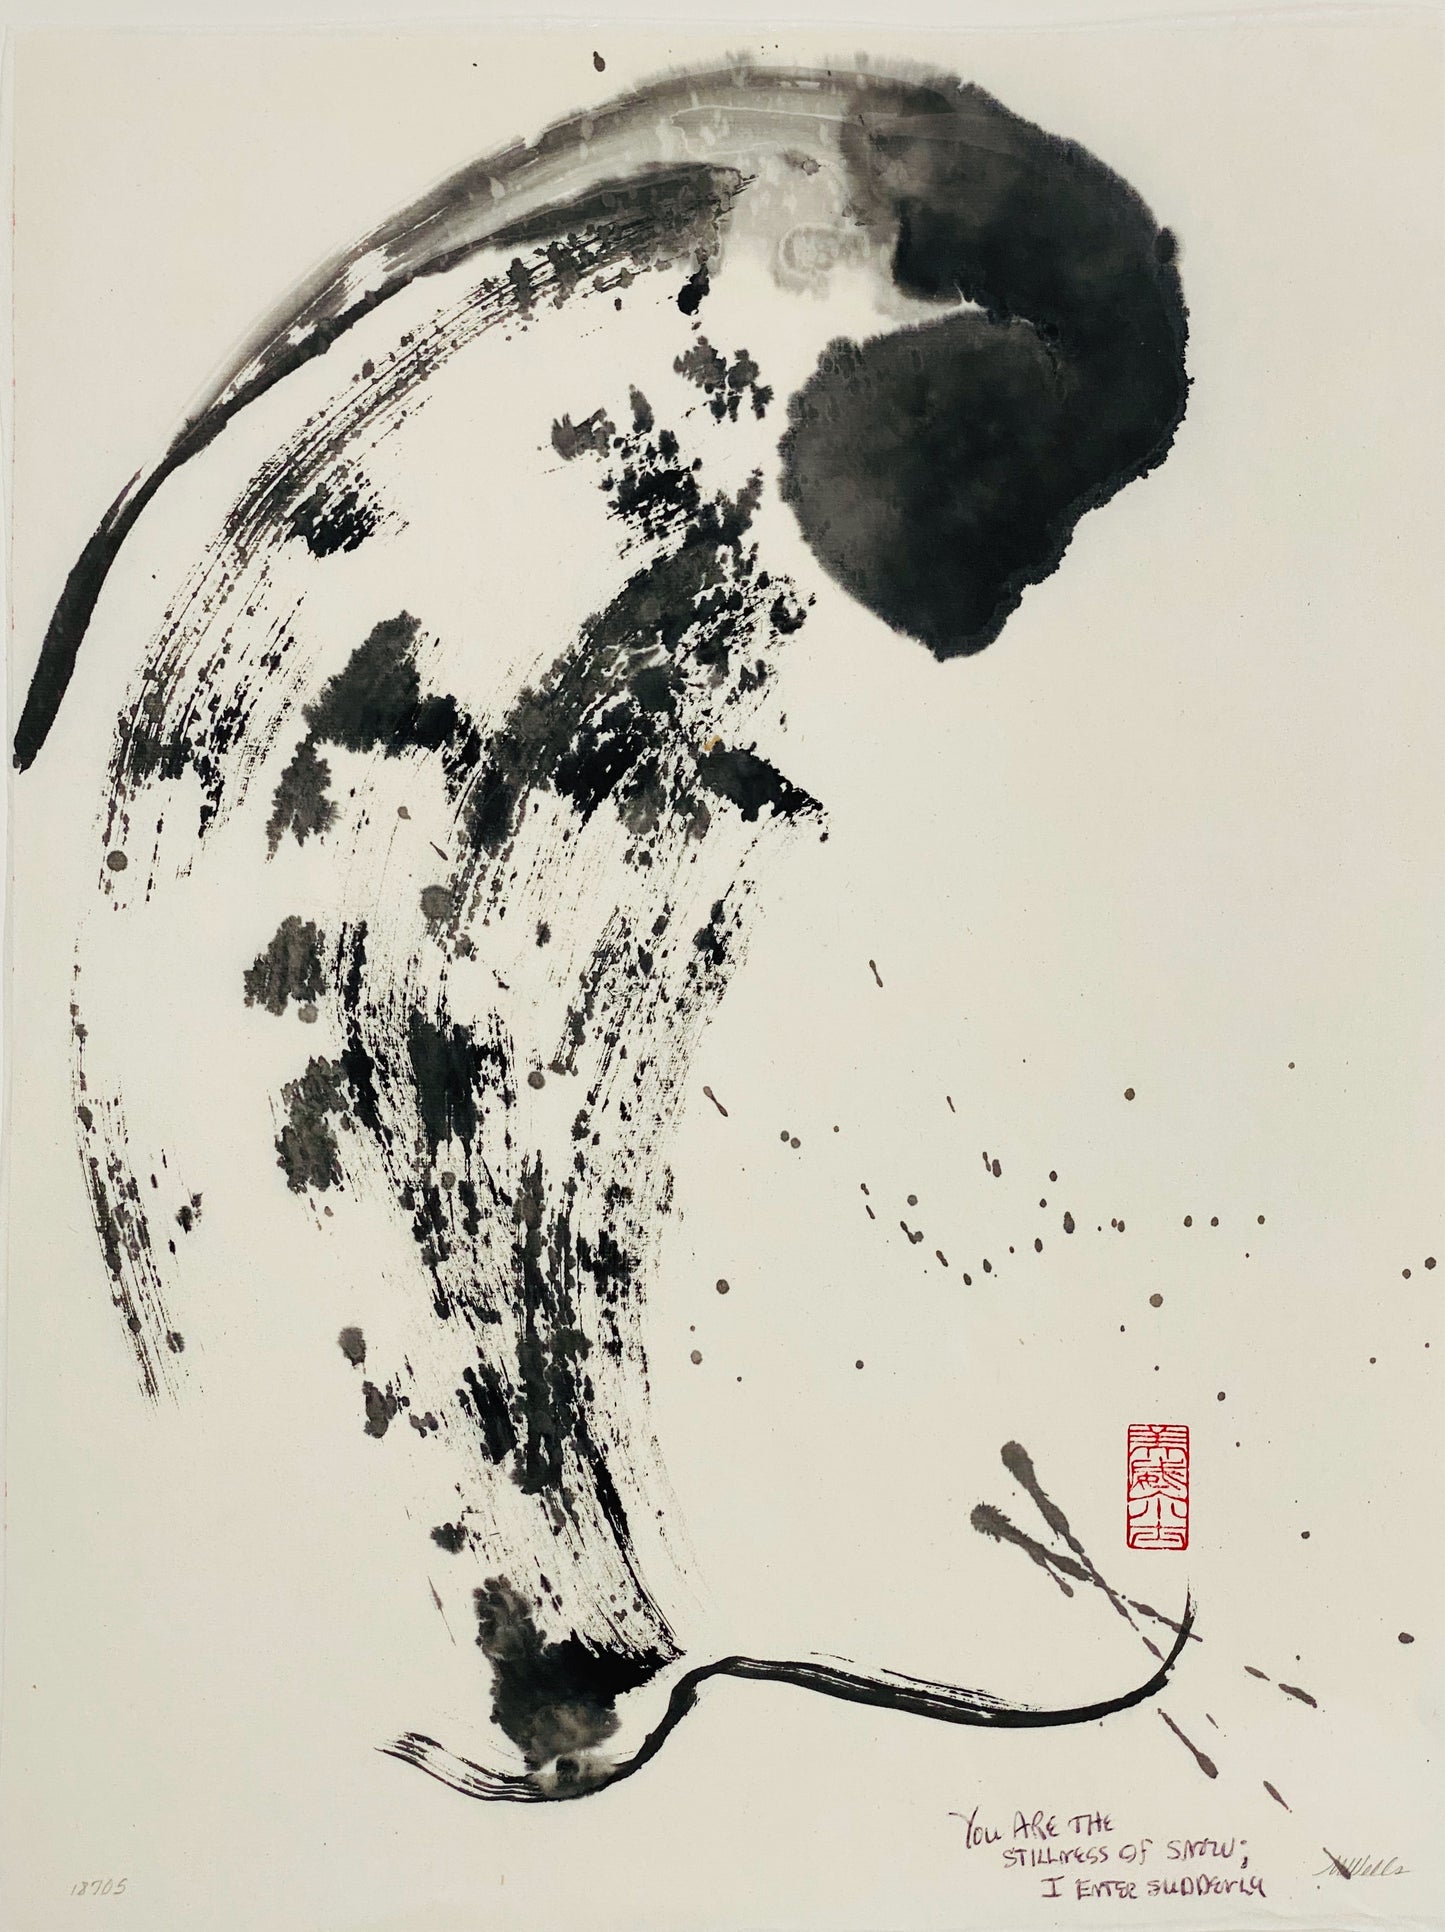 Abstract sumi e Print “Suddenly” by Marilyn Wells